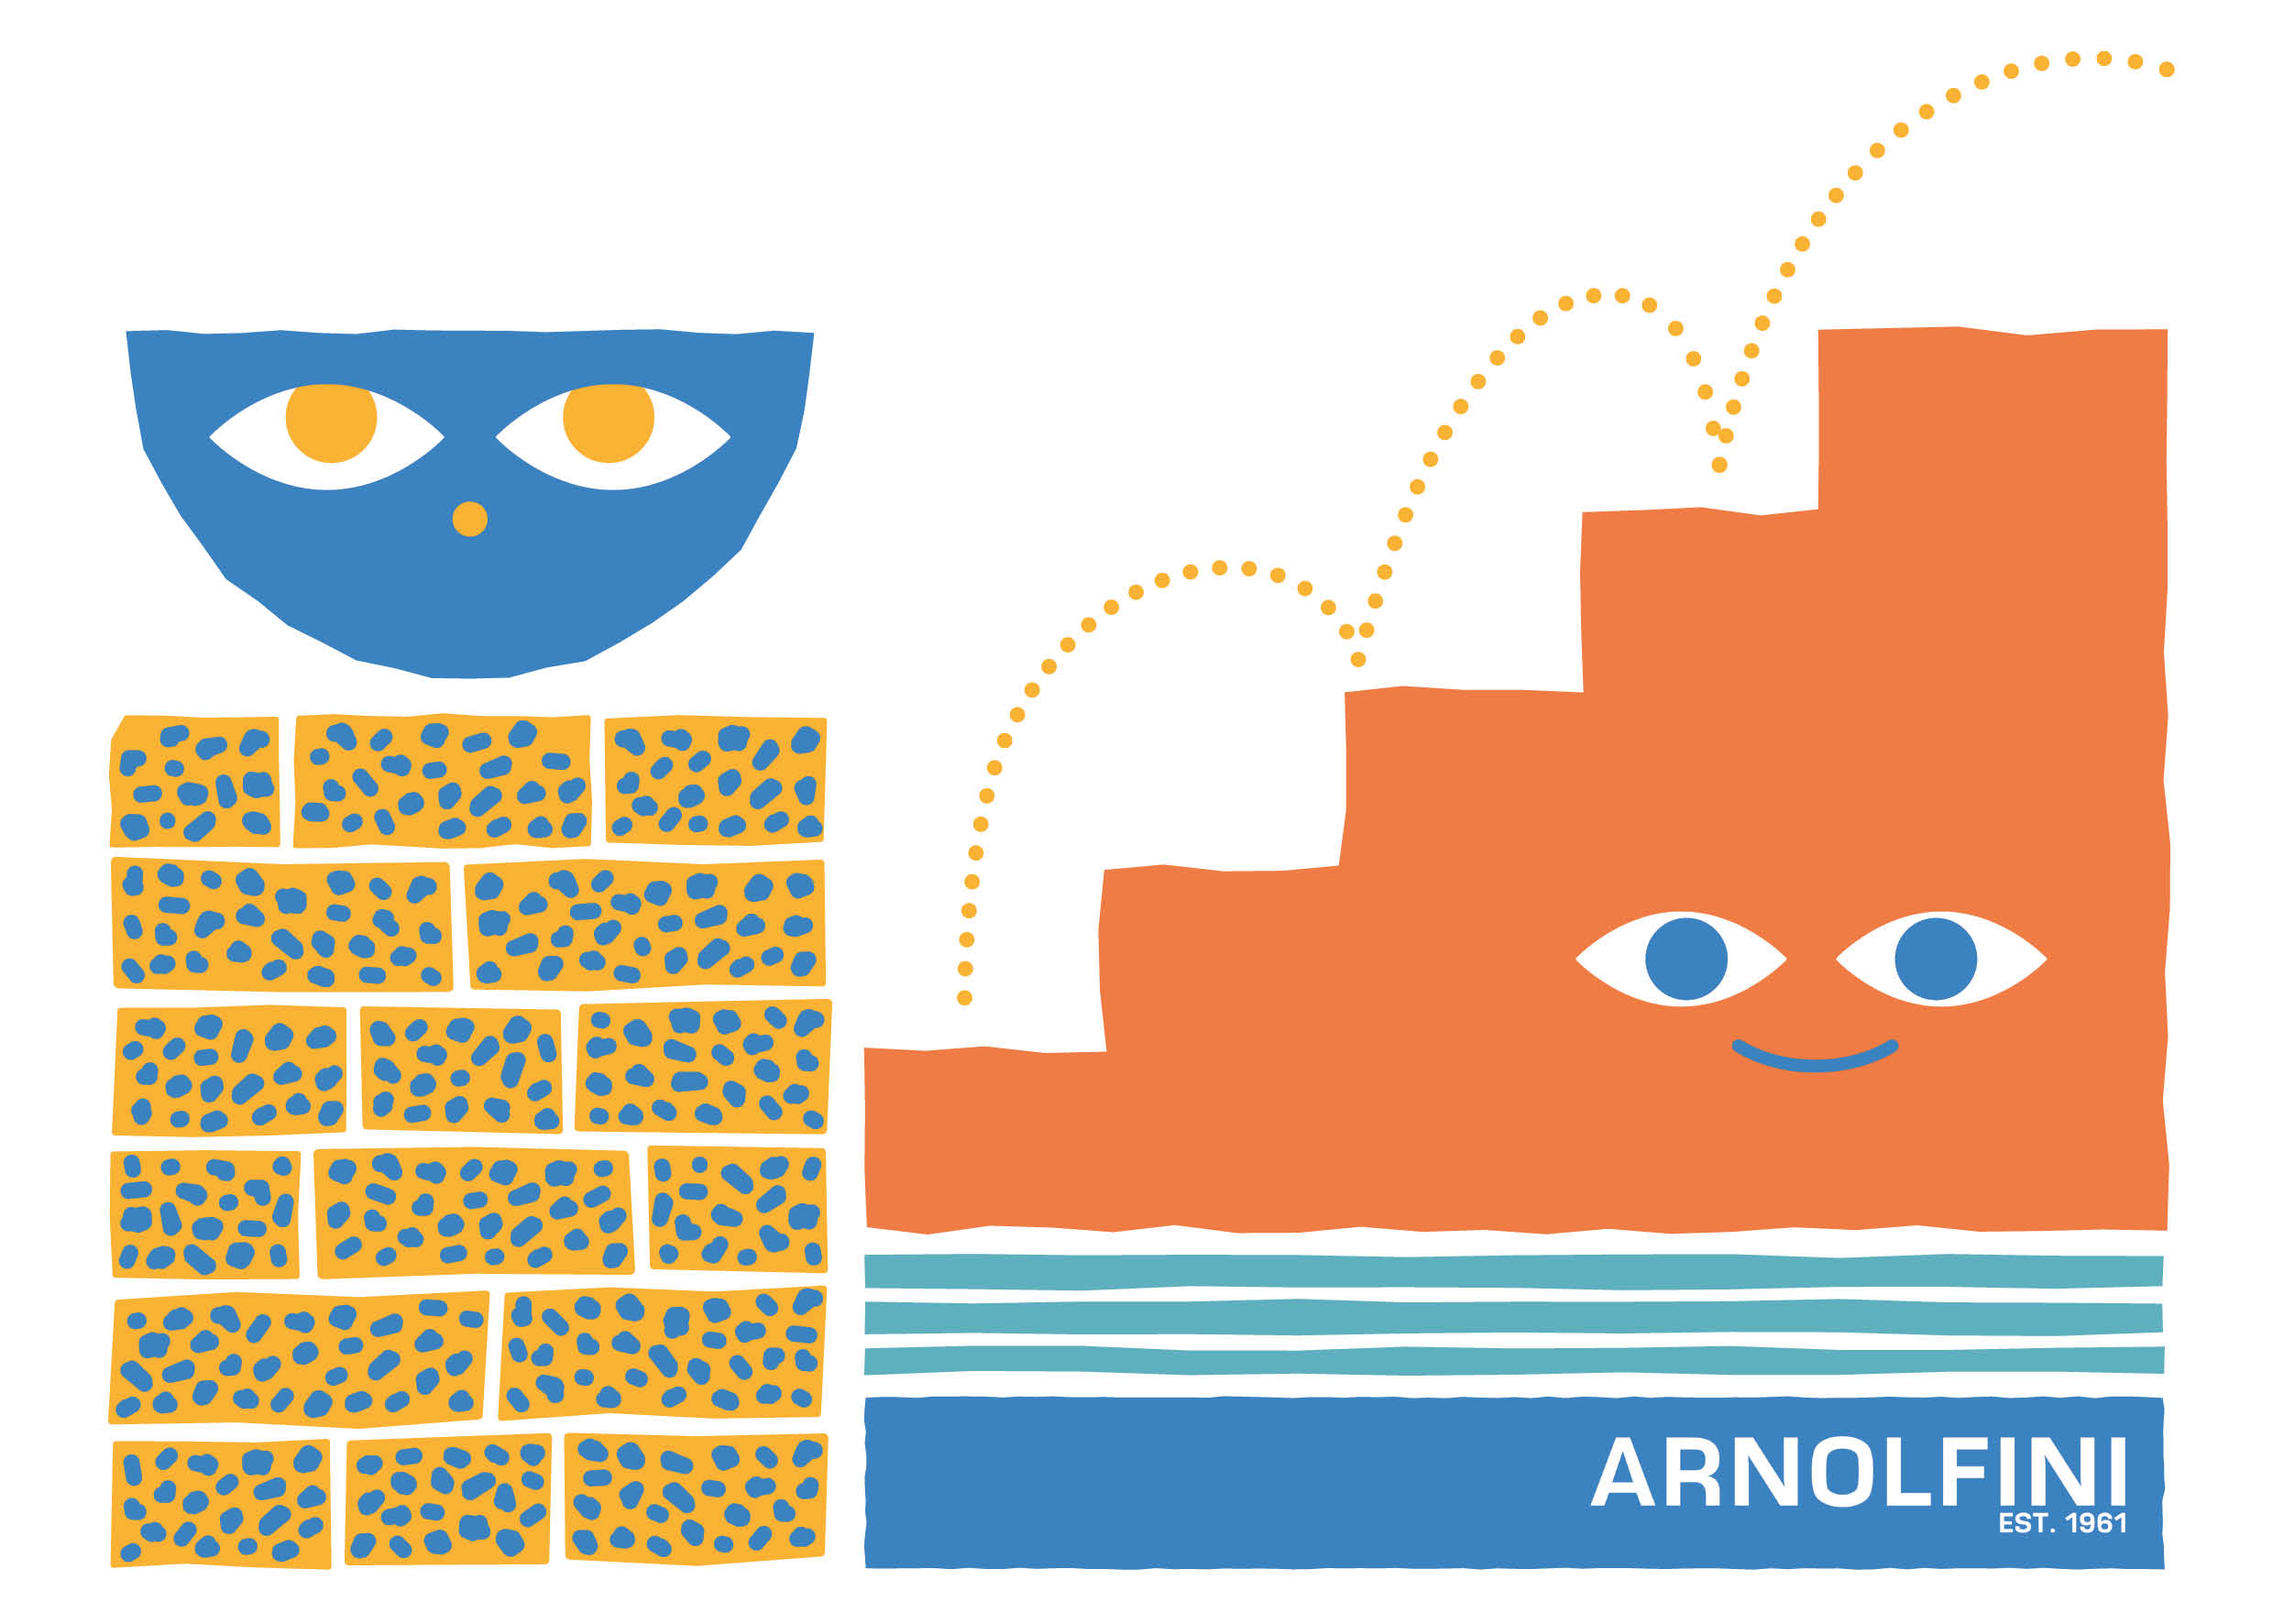 An illustration of a blue semi-circle with eyes, an orange staircase with a smiley face, and the Arnolfini logo.